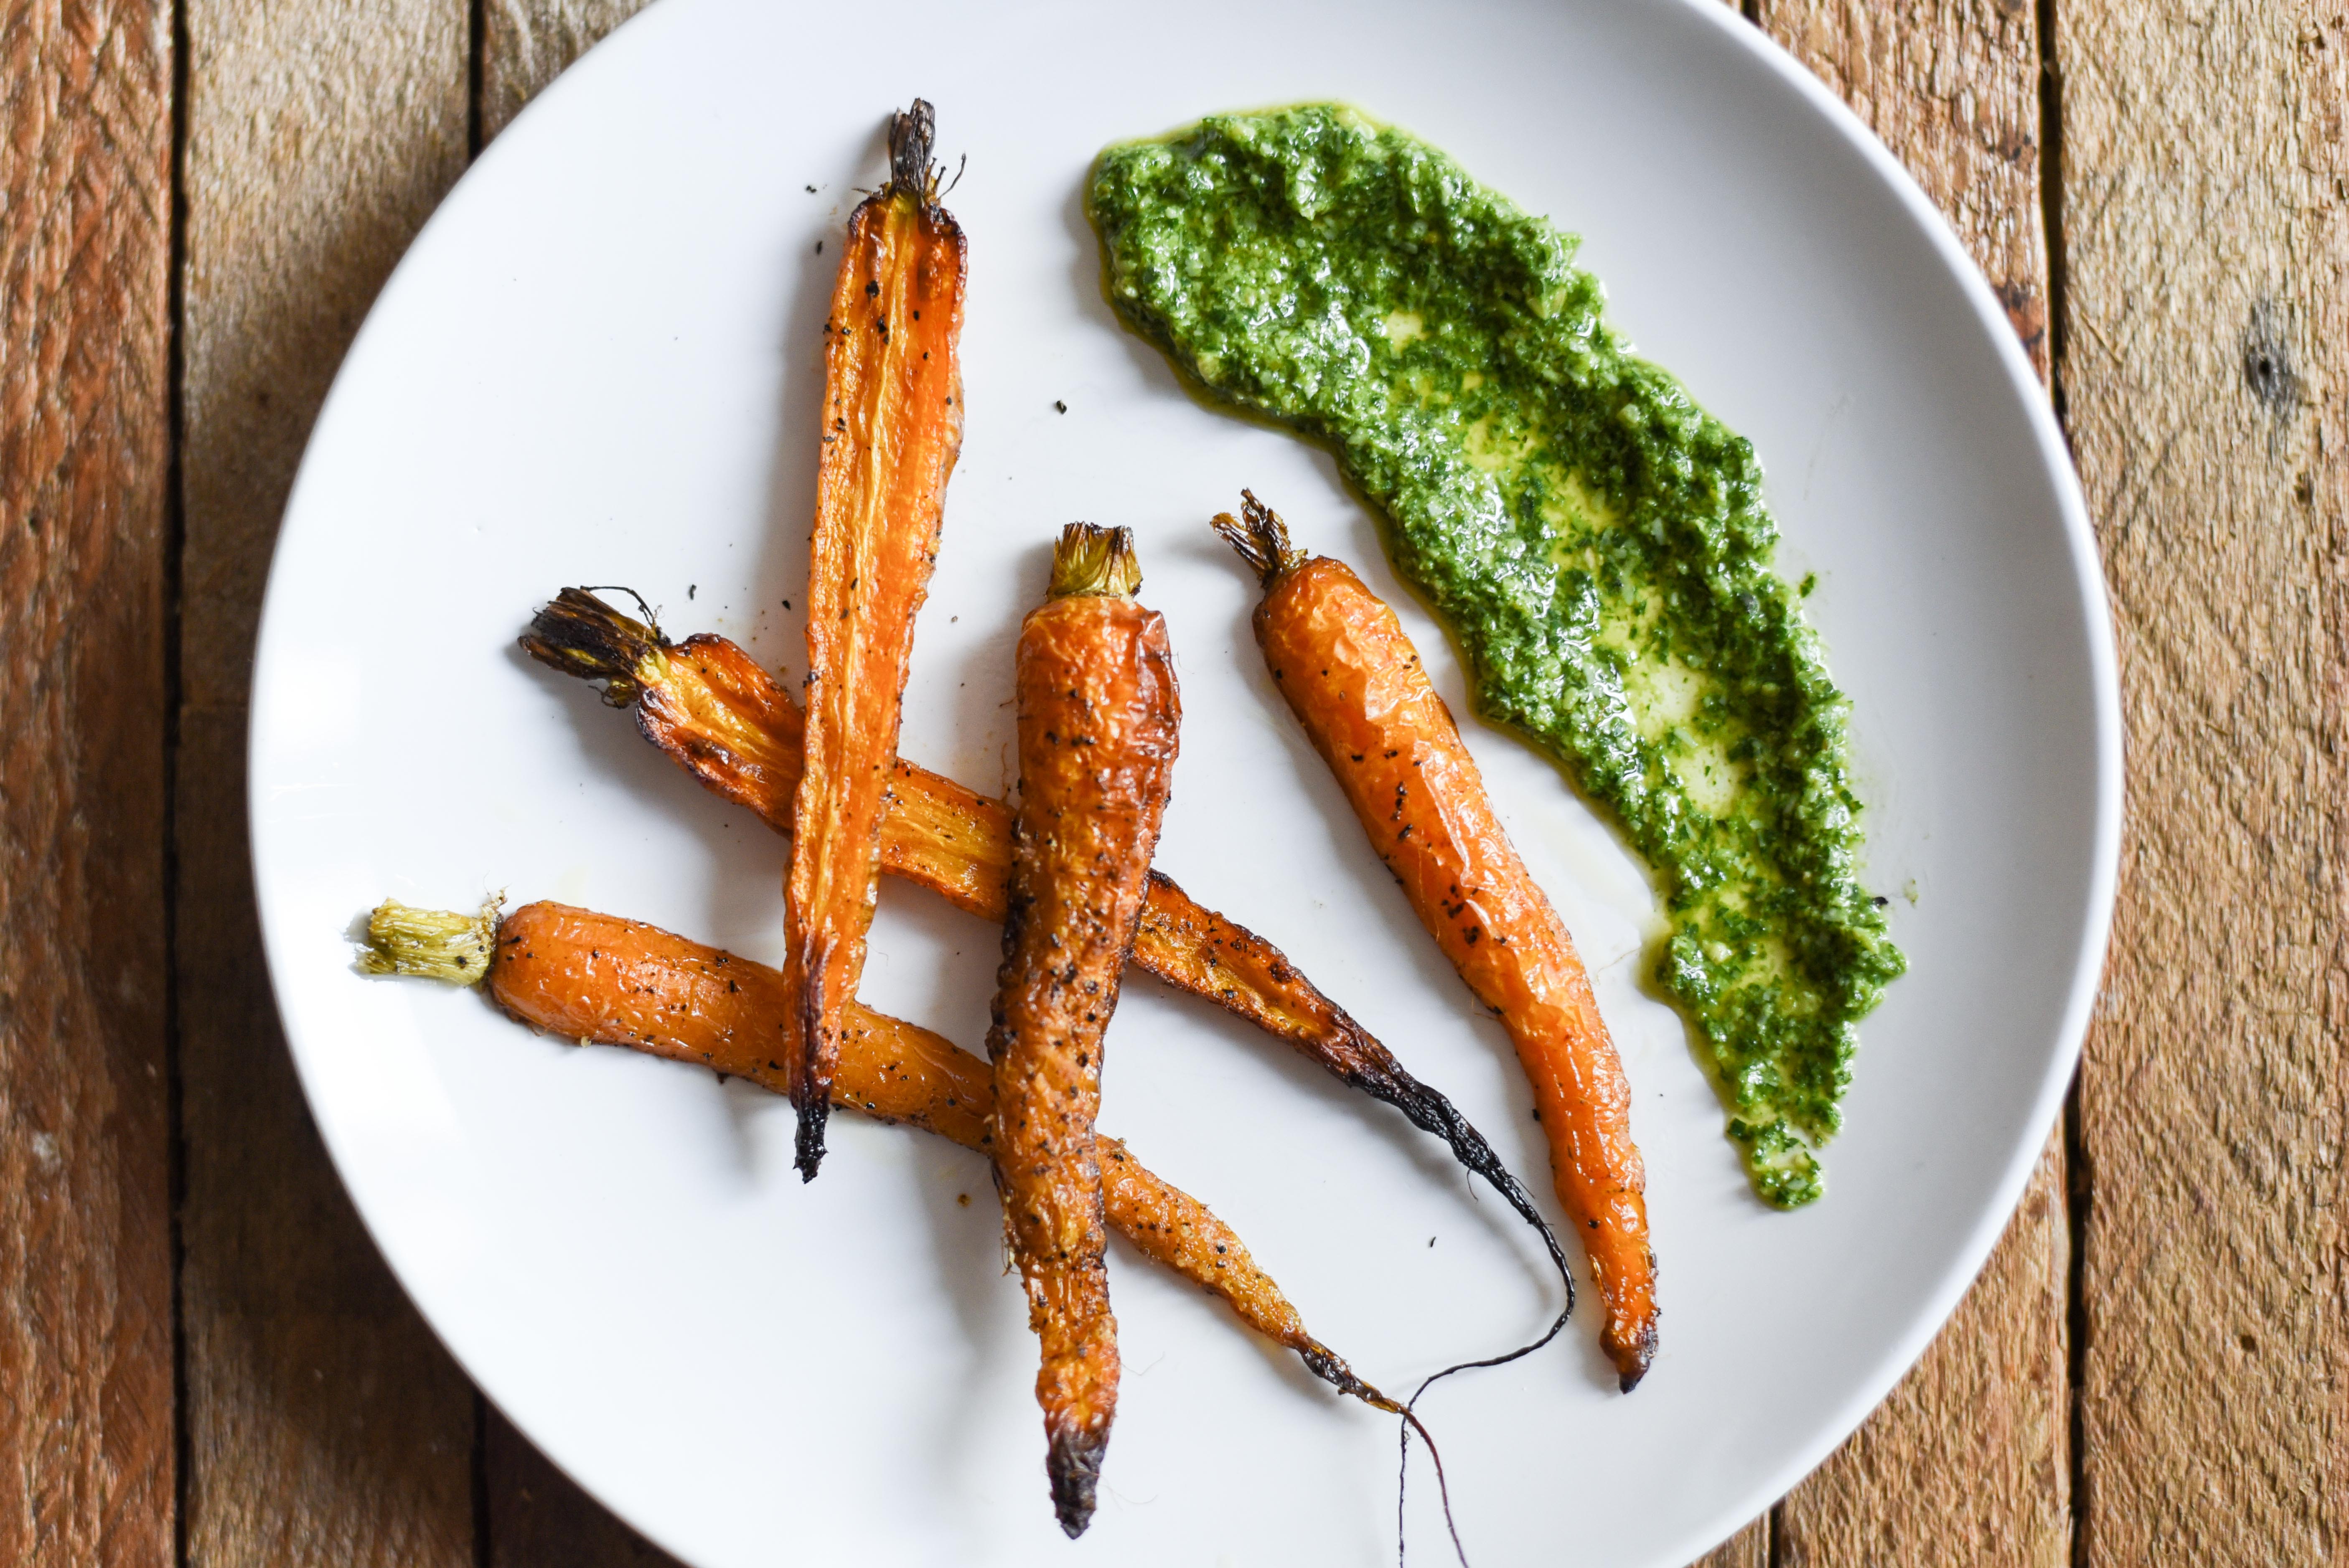 Don't toss your carrot tops! Use them for a lemony carrot top pesto | kenanhill.com